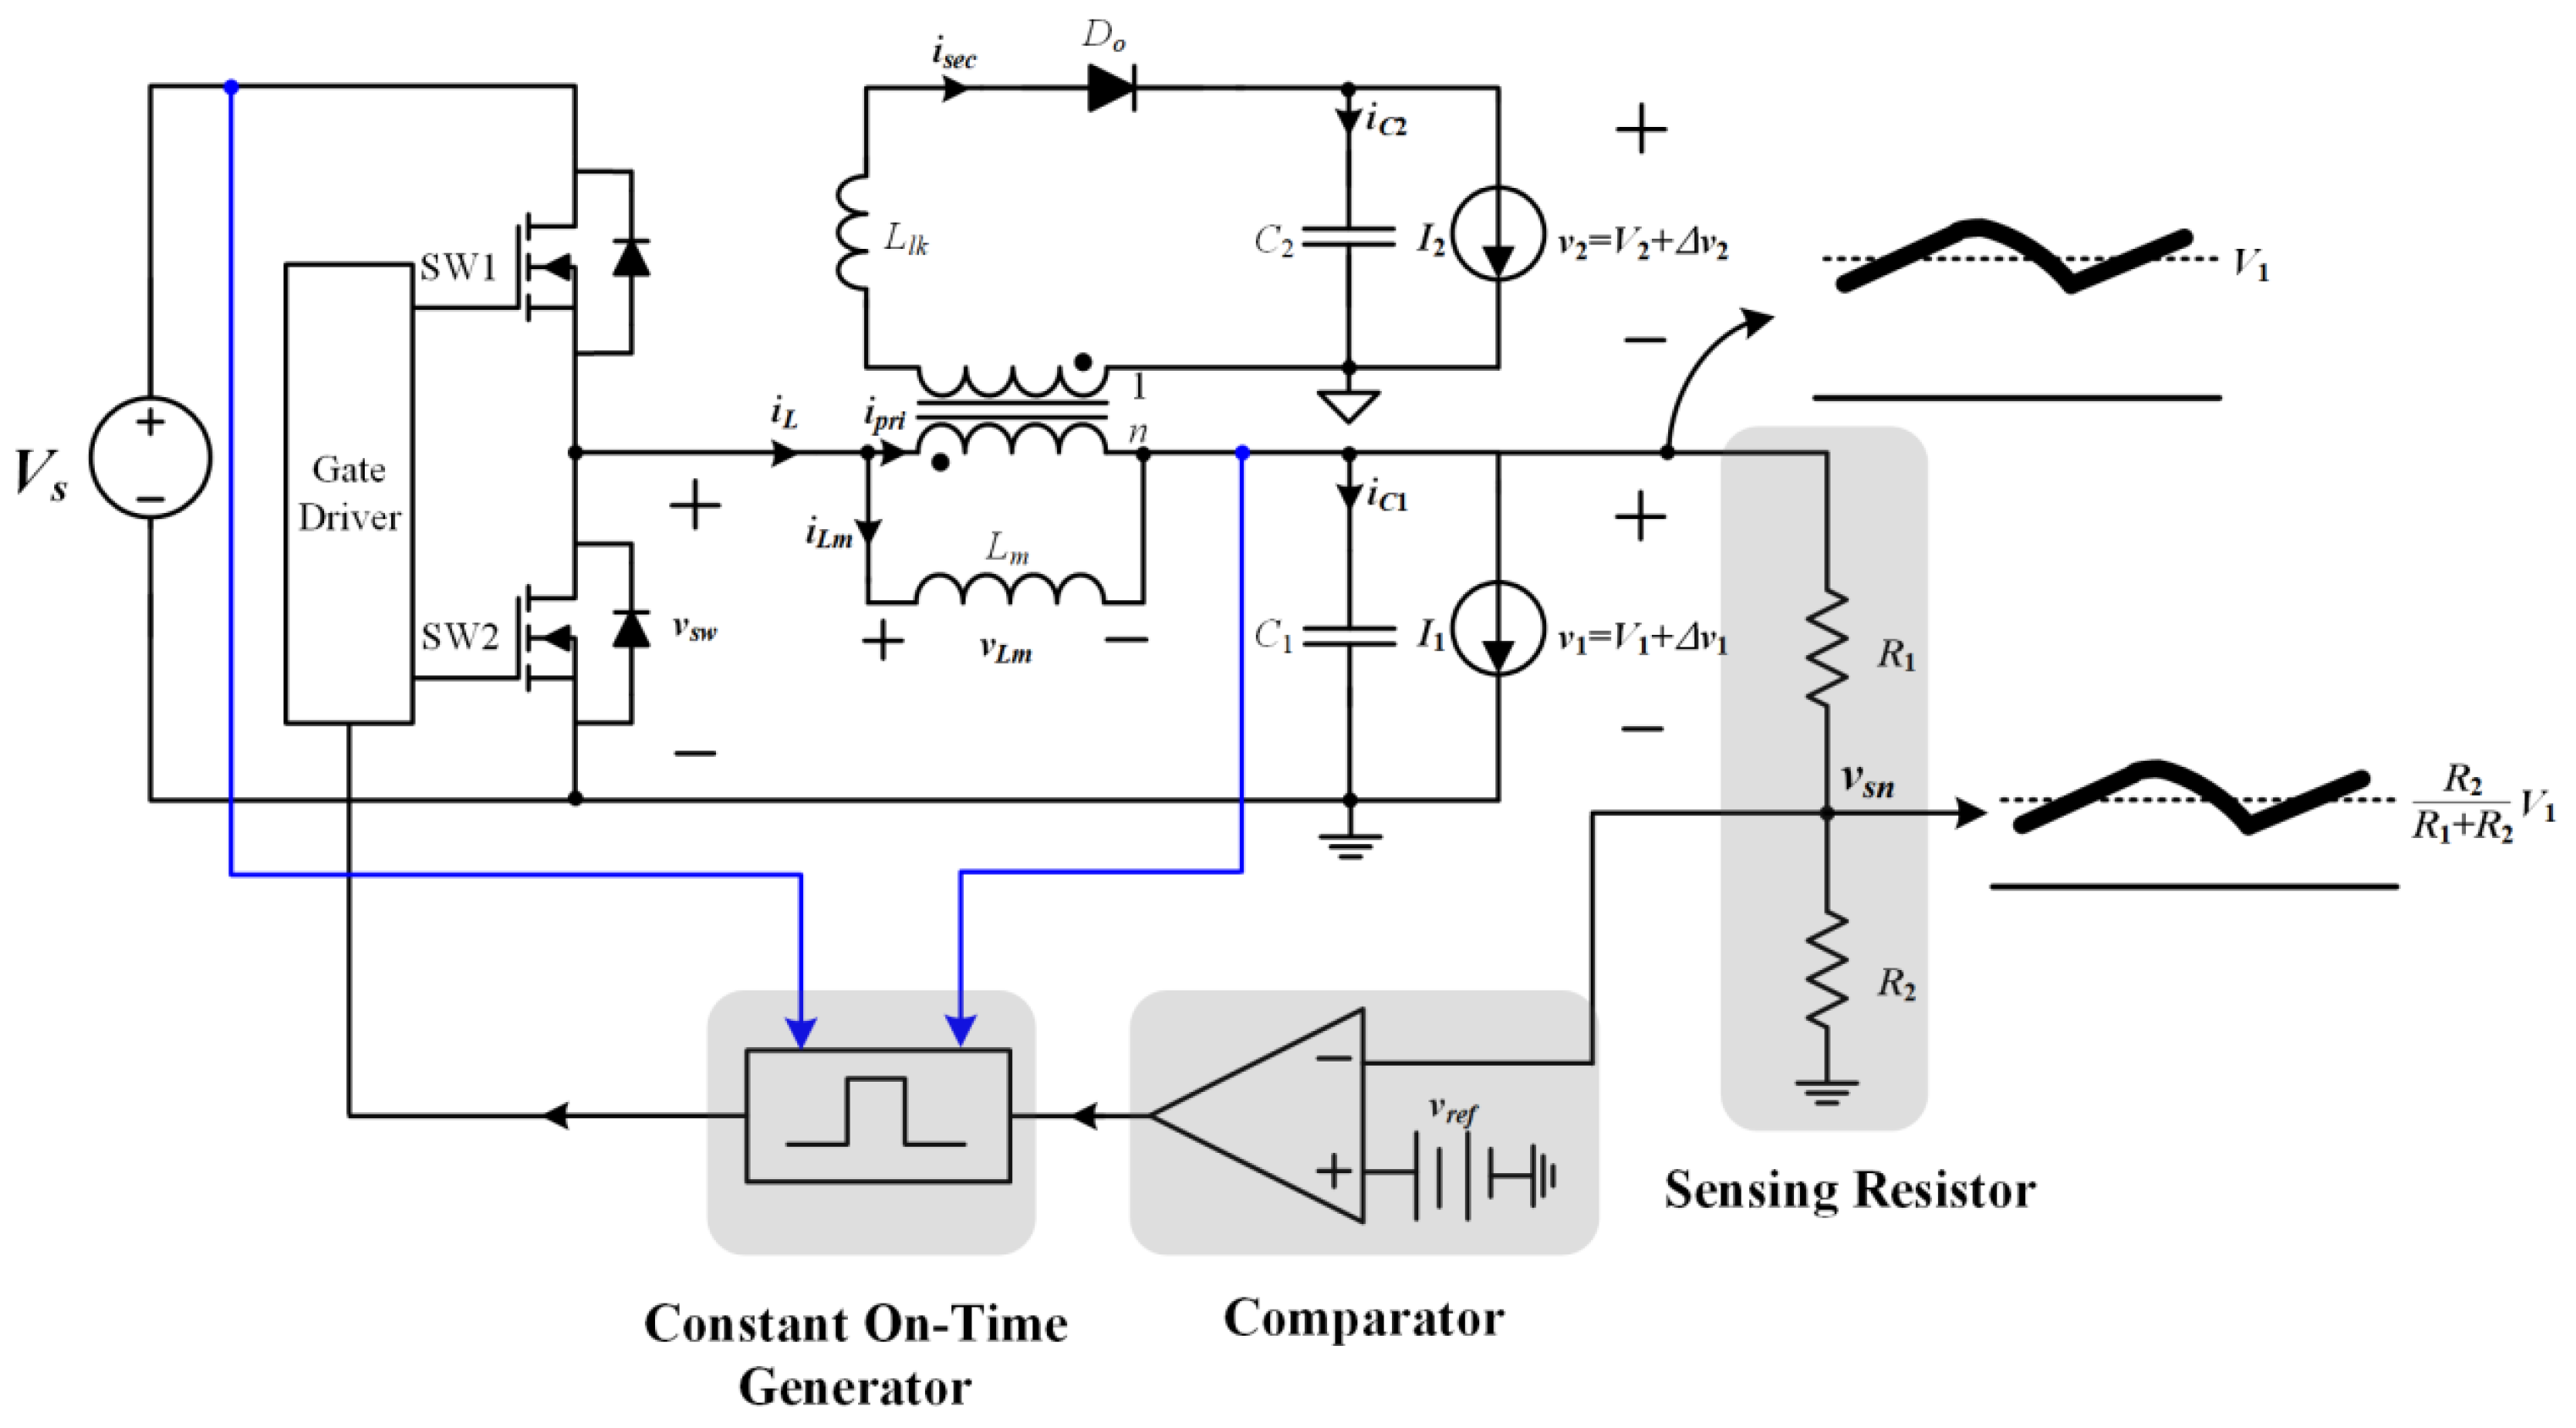 Presents the block diagram of the COT DC-DC Buck Converter which is